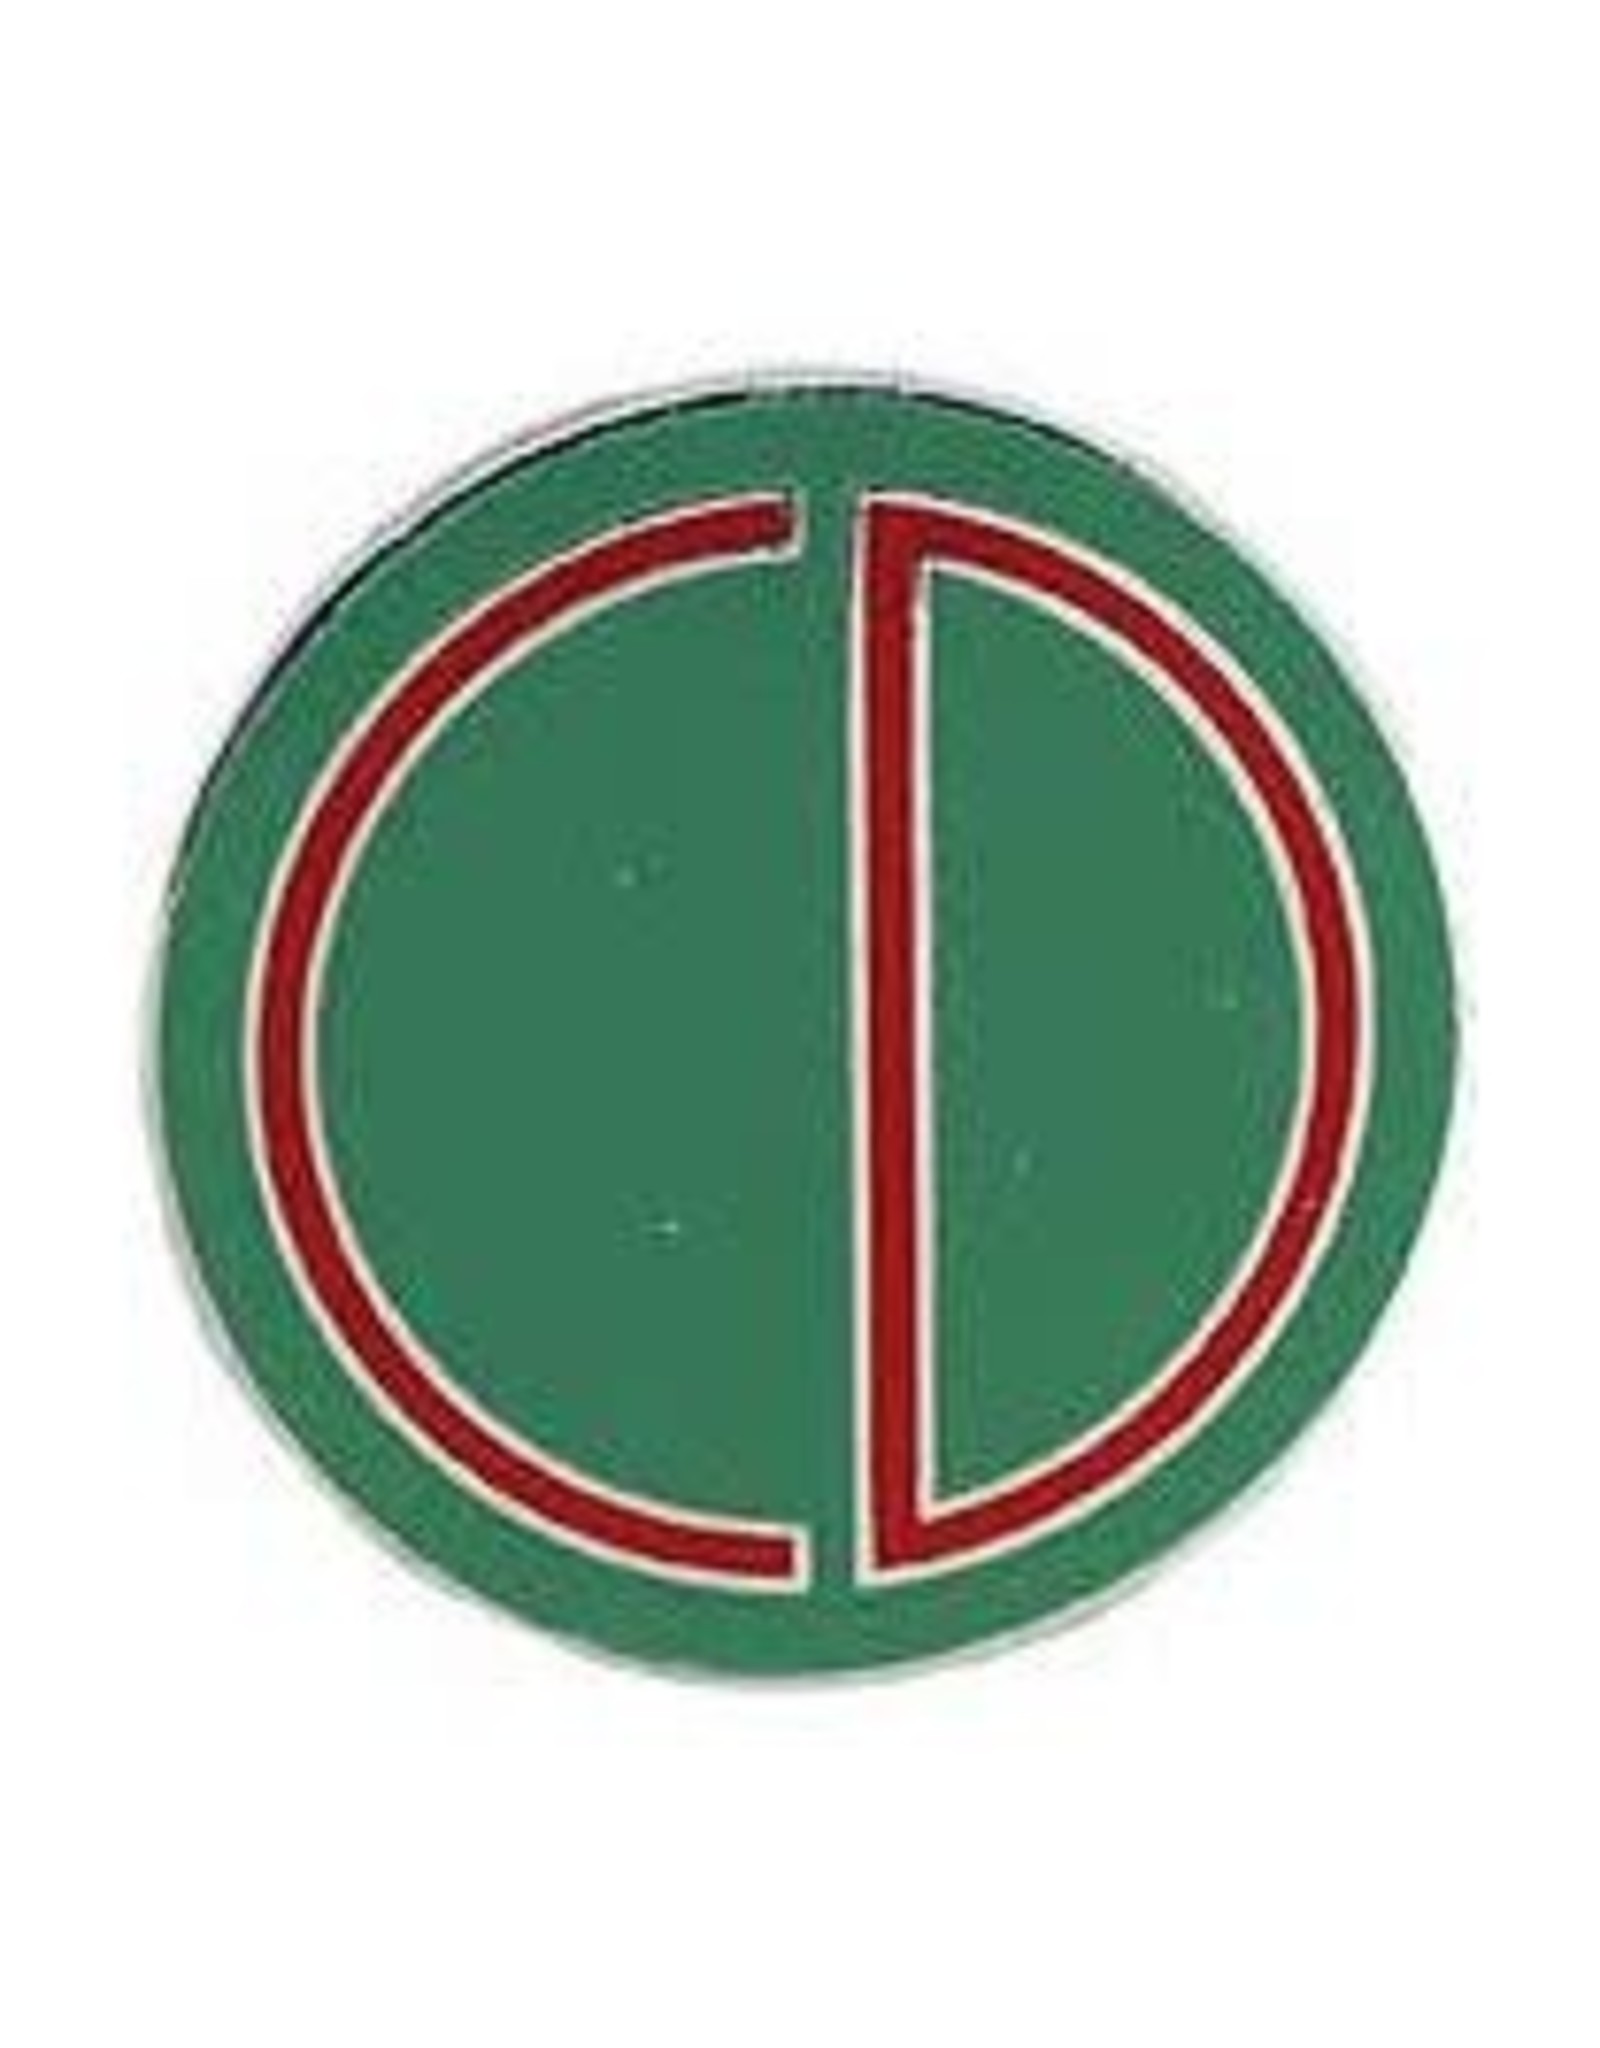 Pin - Army 085th Inf Div